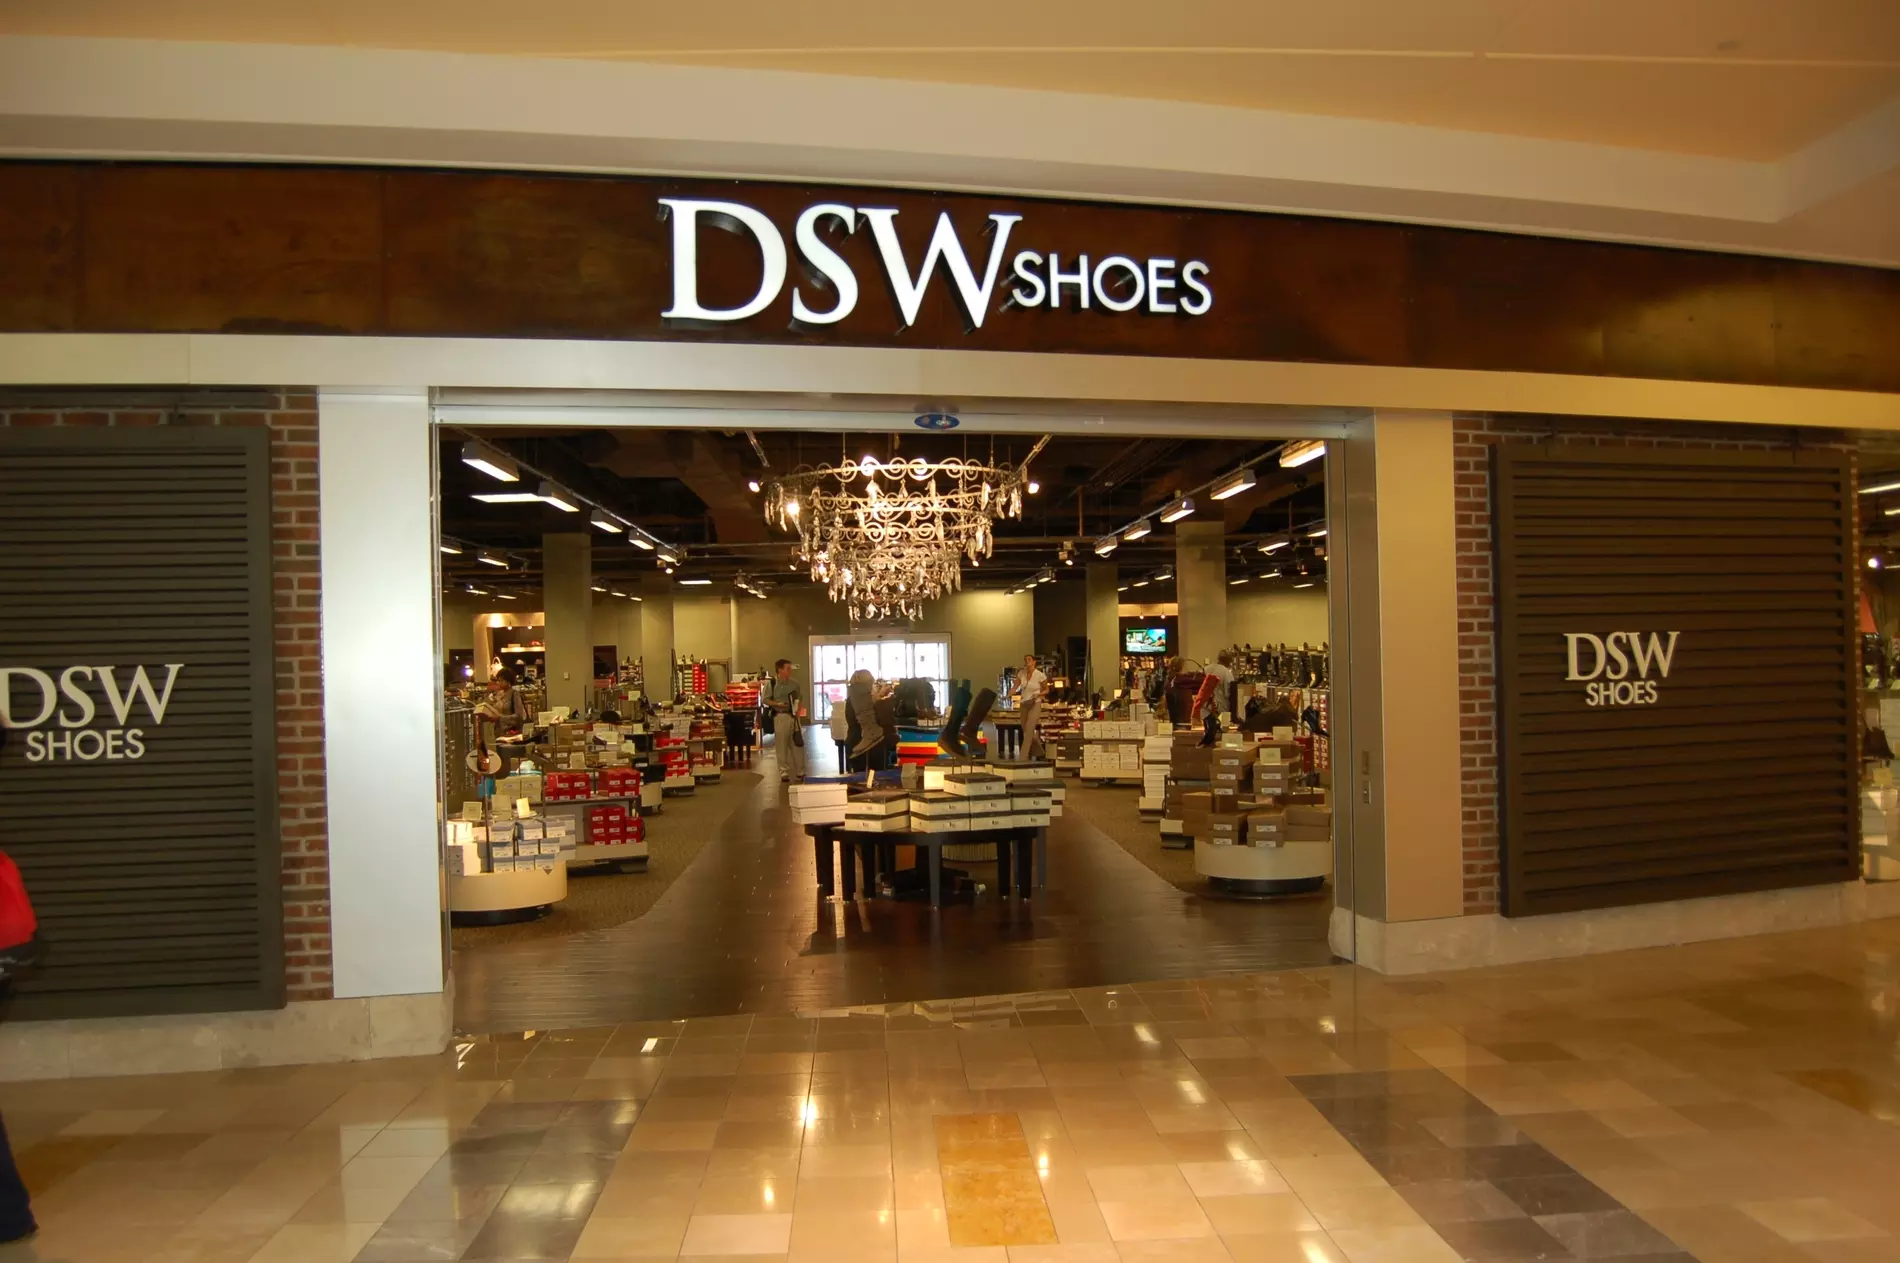 How To Check Your DSW Gift Card Balance